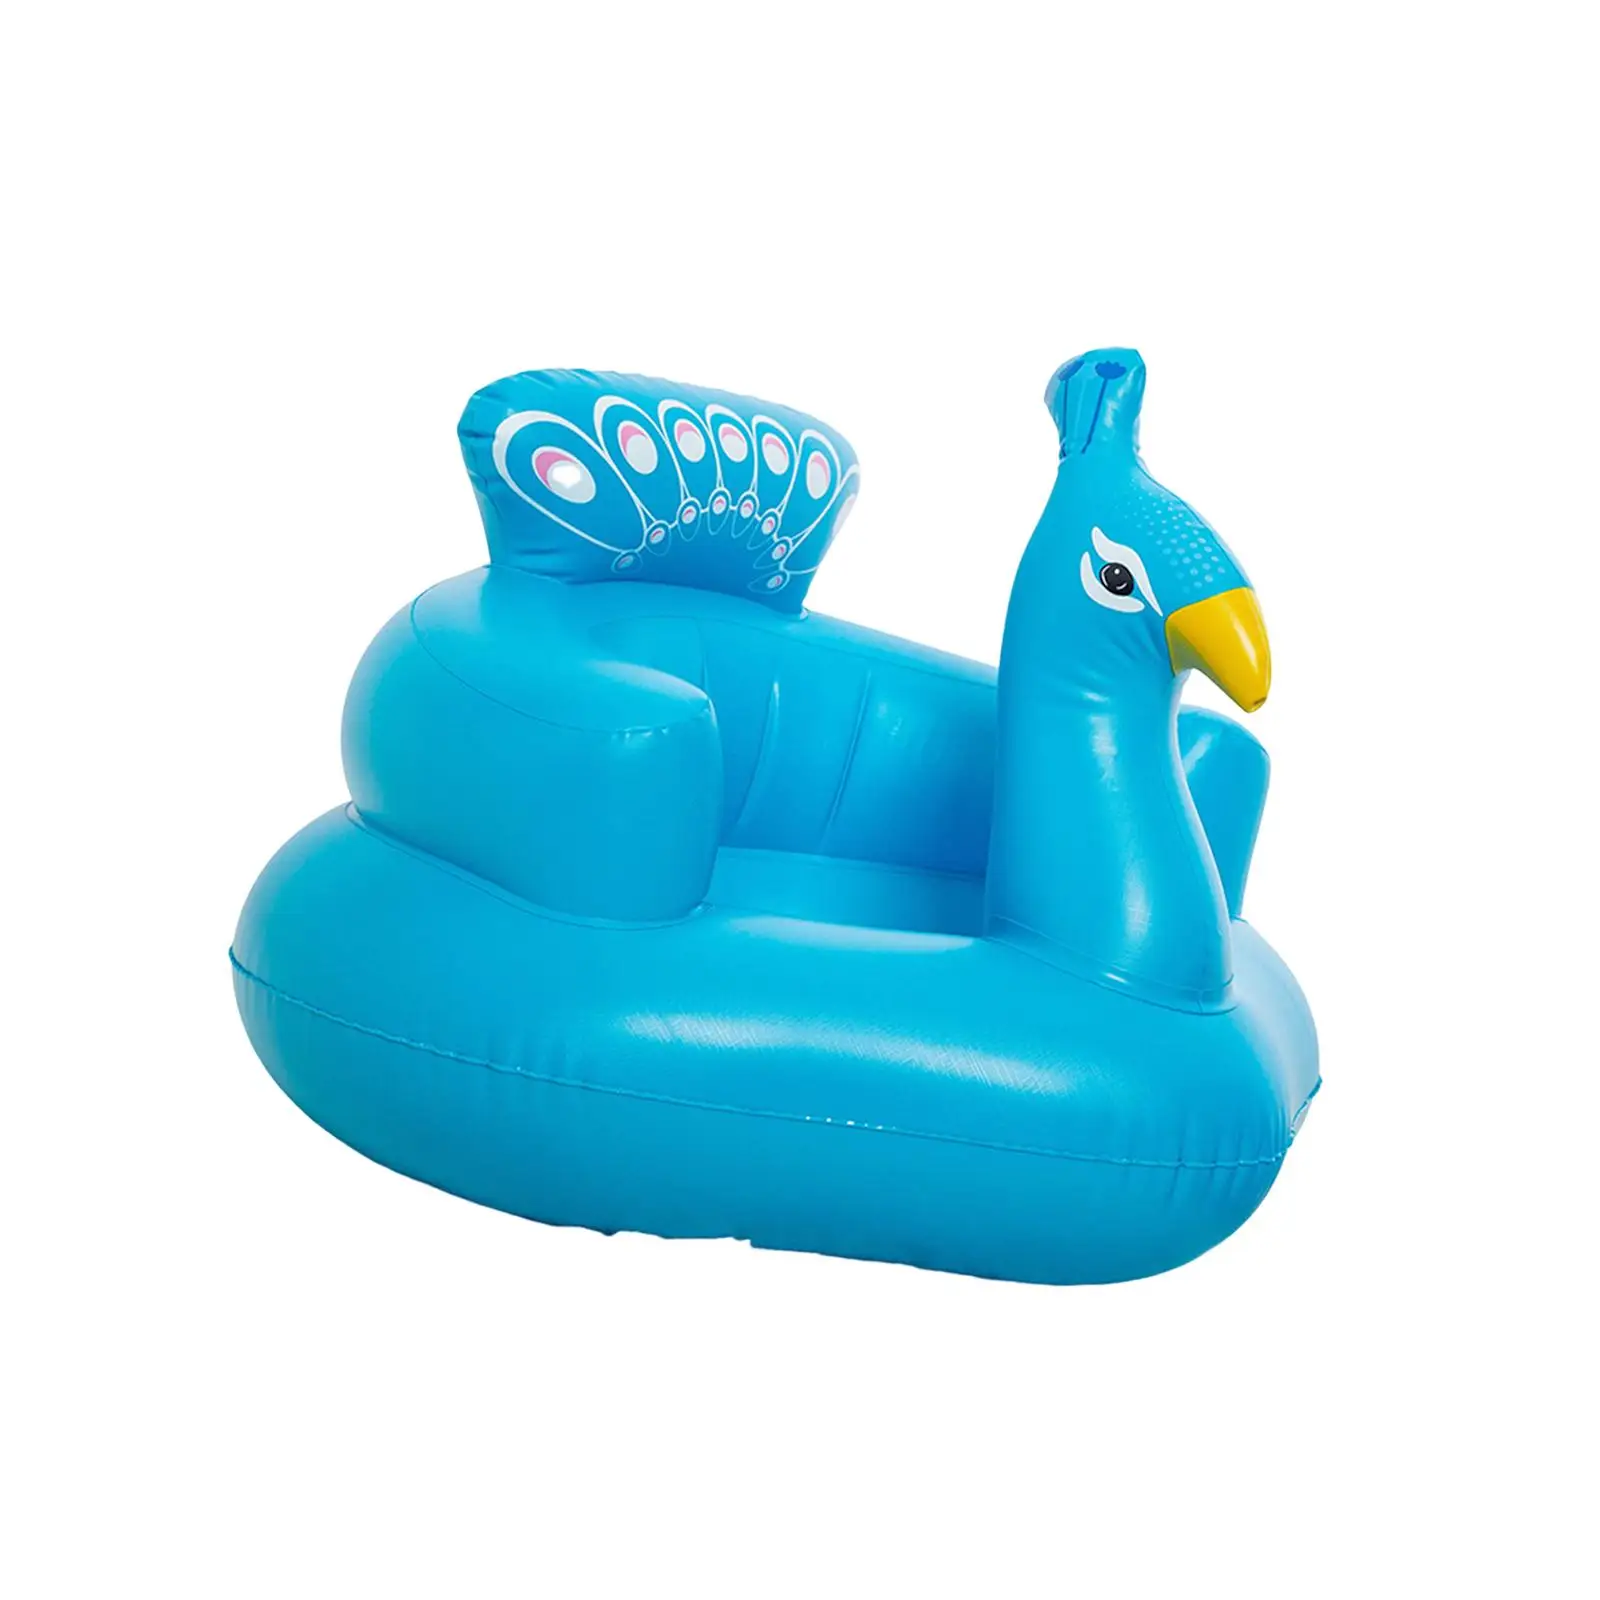 Inflation Baby Chair Seat Pool Water Toy 3 Months and up Infant Support Seat Playing Game toy Inflatable Seat for Babies